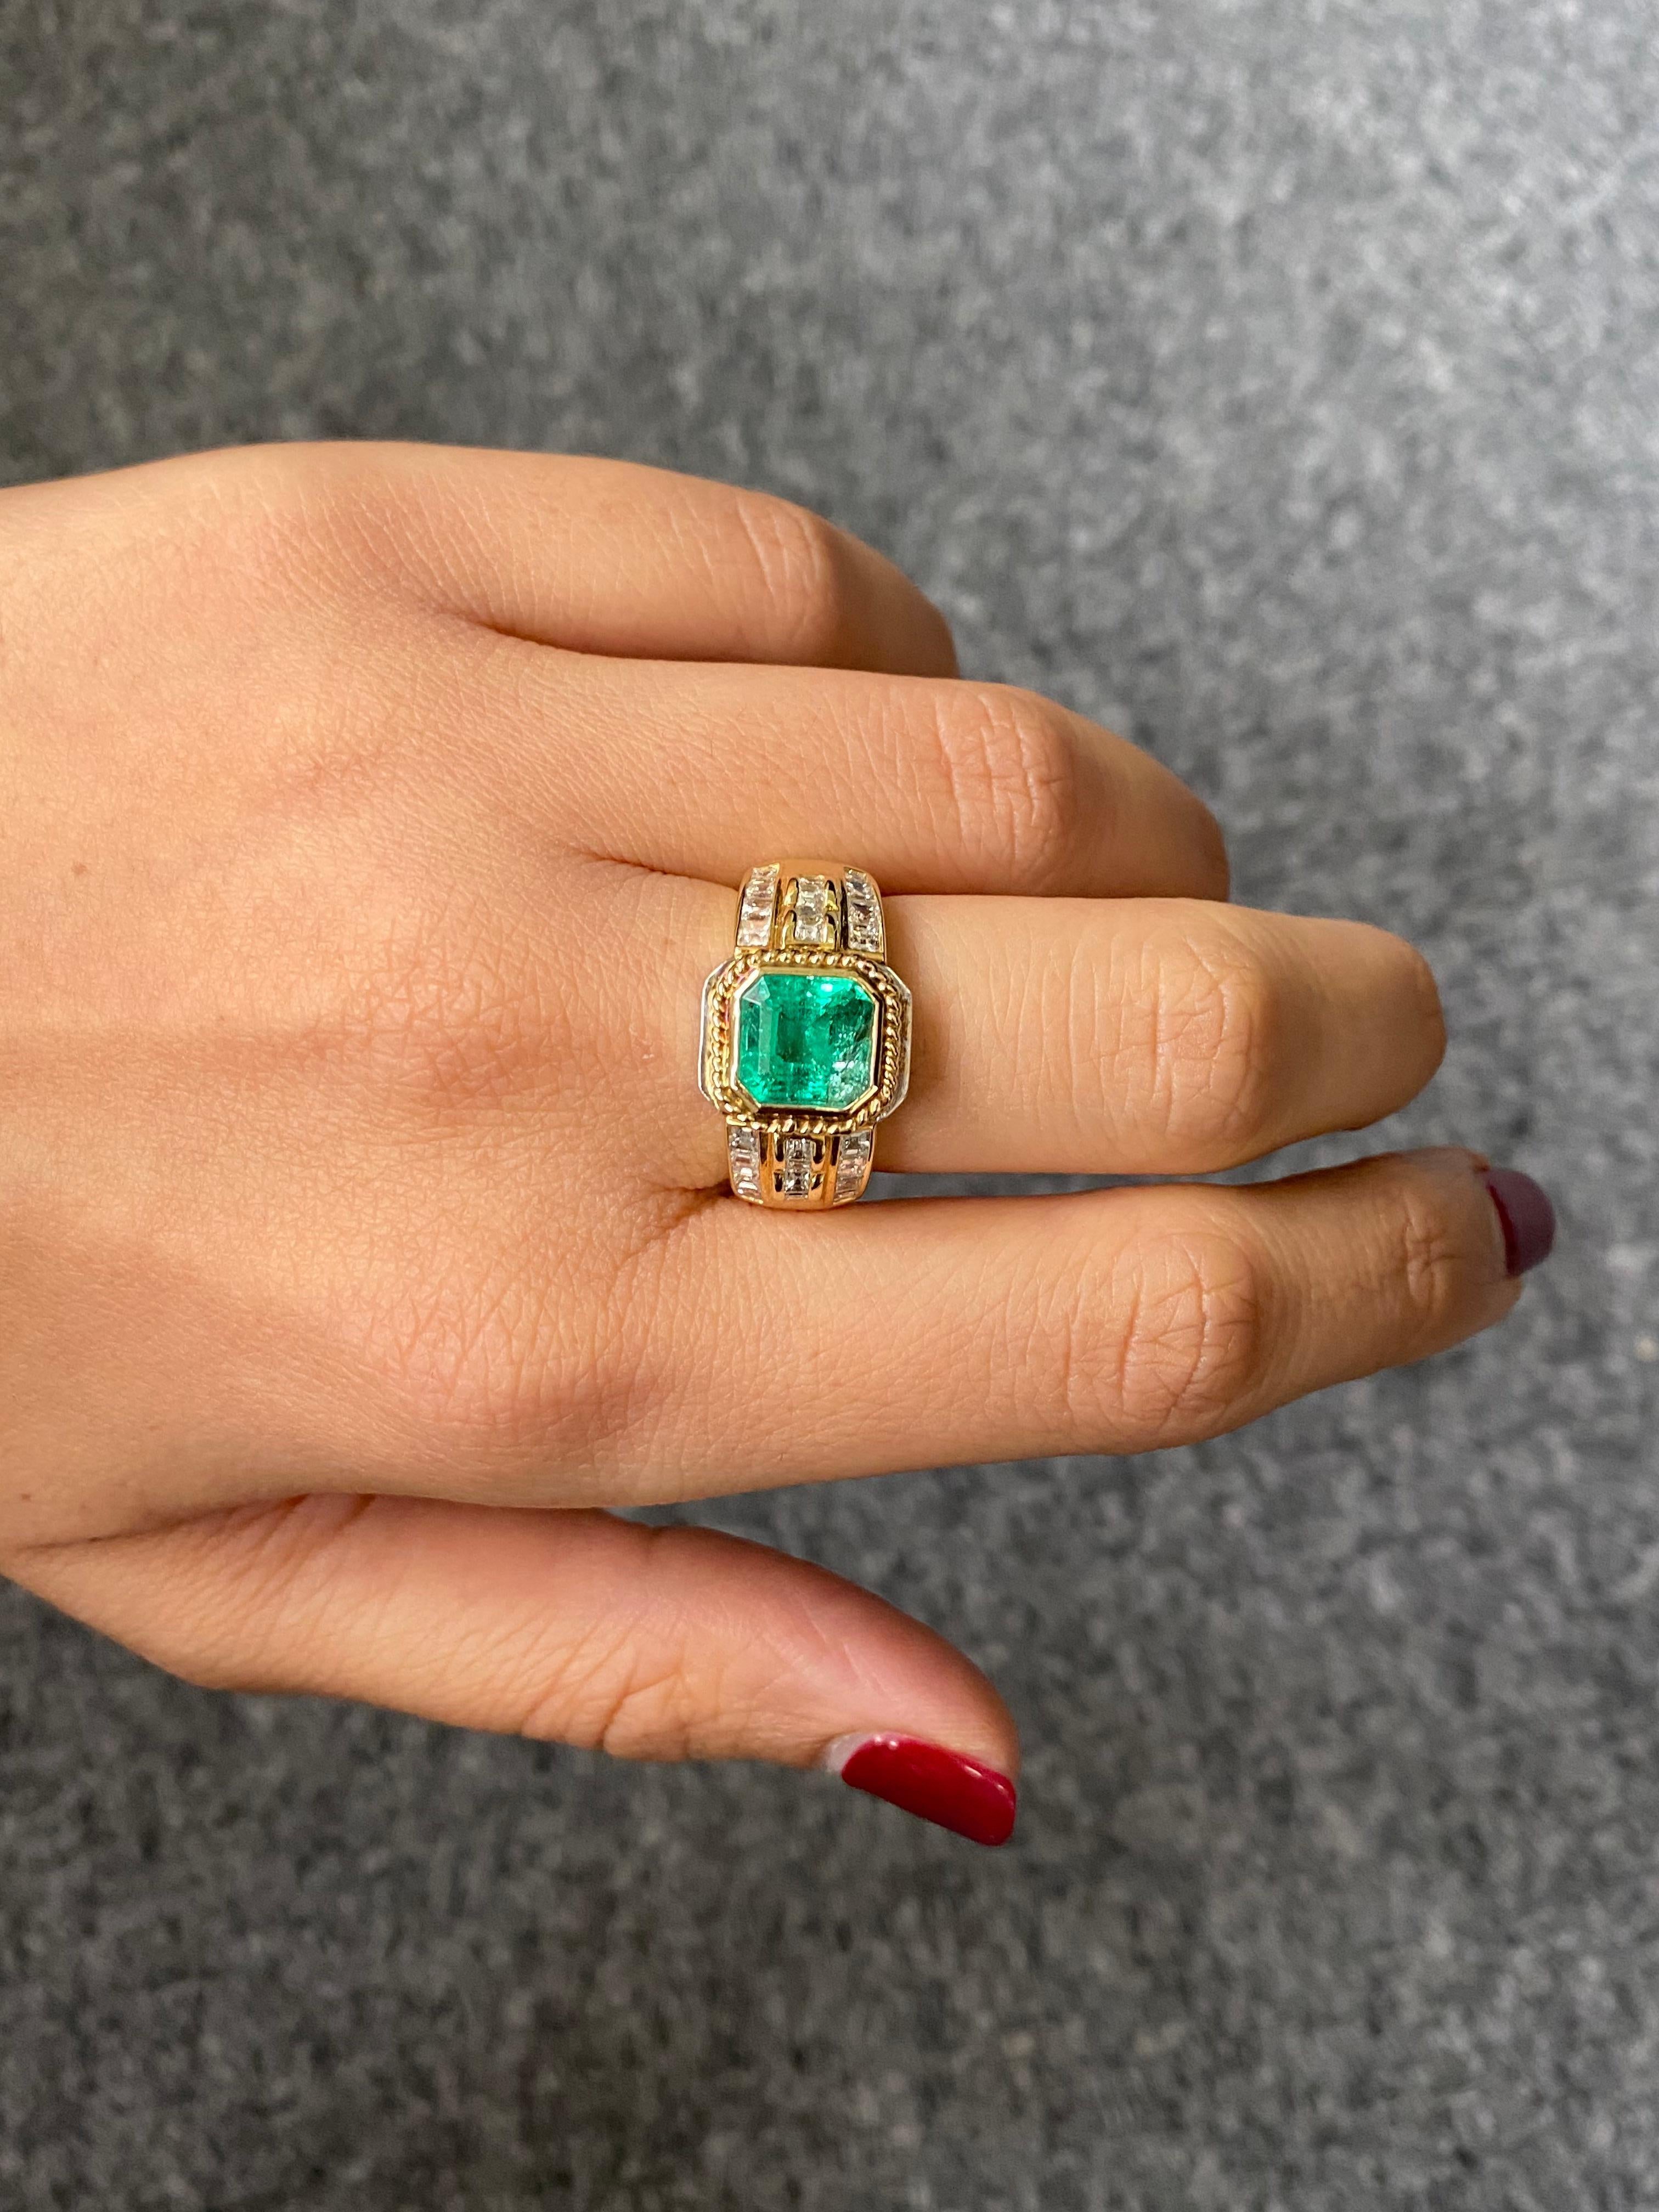 Antique looking, beautiful 2.09 carat Colombian Emerald and 1.70 carat White Diamond band ring. This ring is suitable for both, men and women. The ring is set in solid 18K White and Yellow Gold. The centre stone is absolutely transparent, with